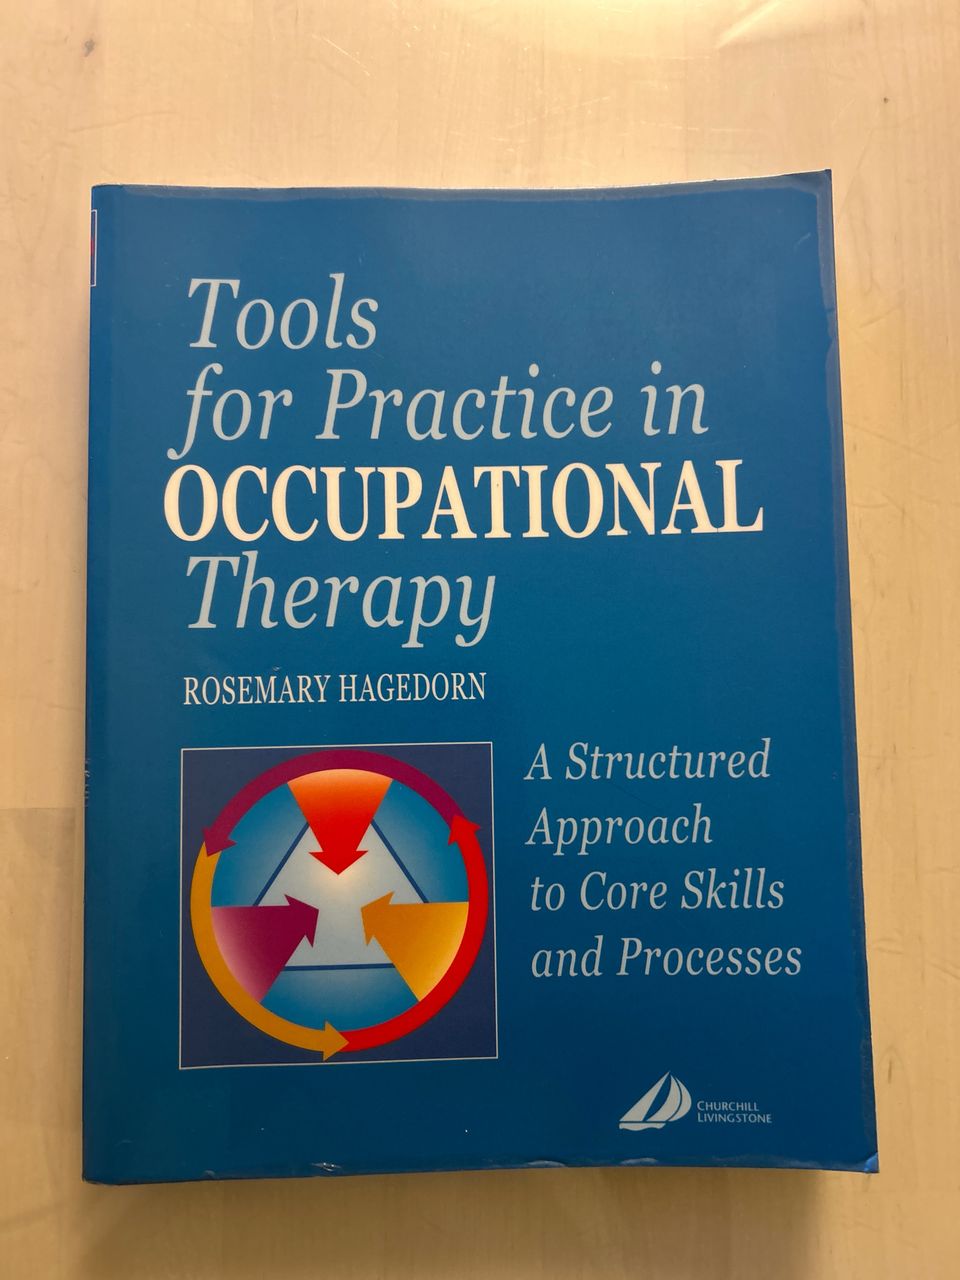 Tools for Practice in Occupational Therapy